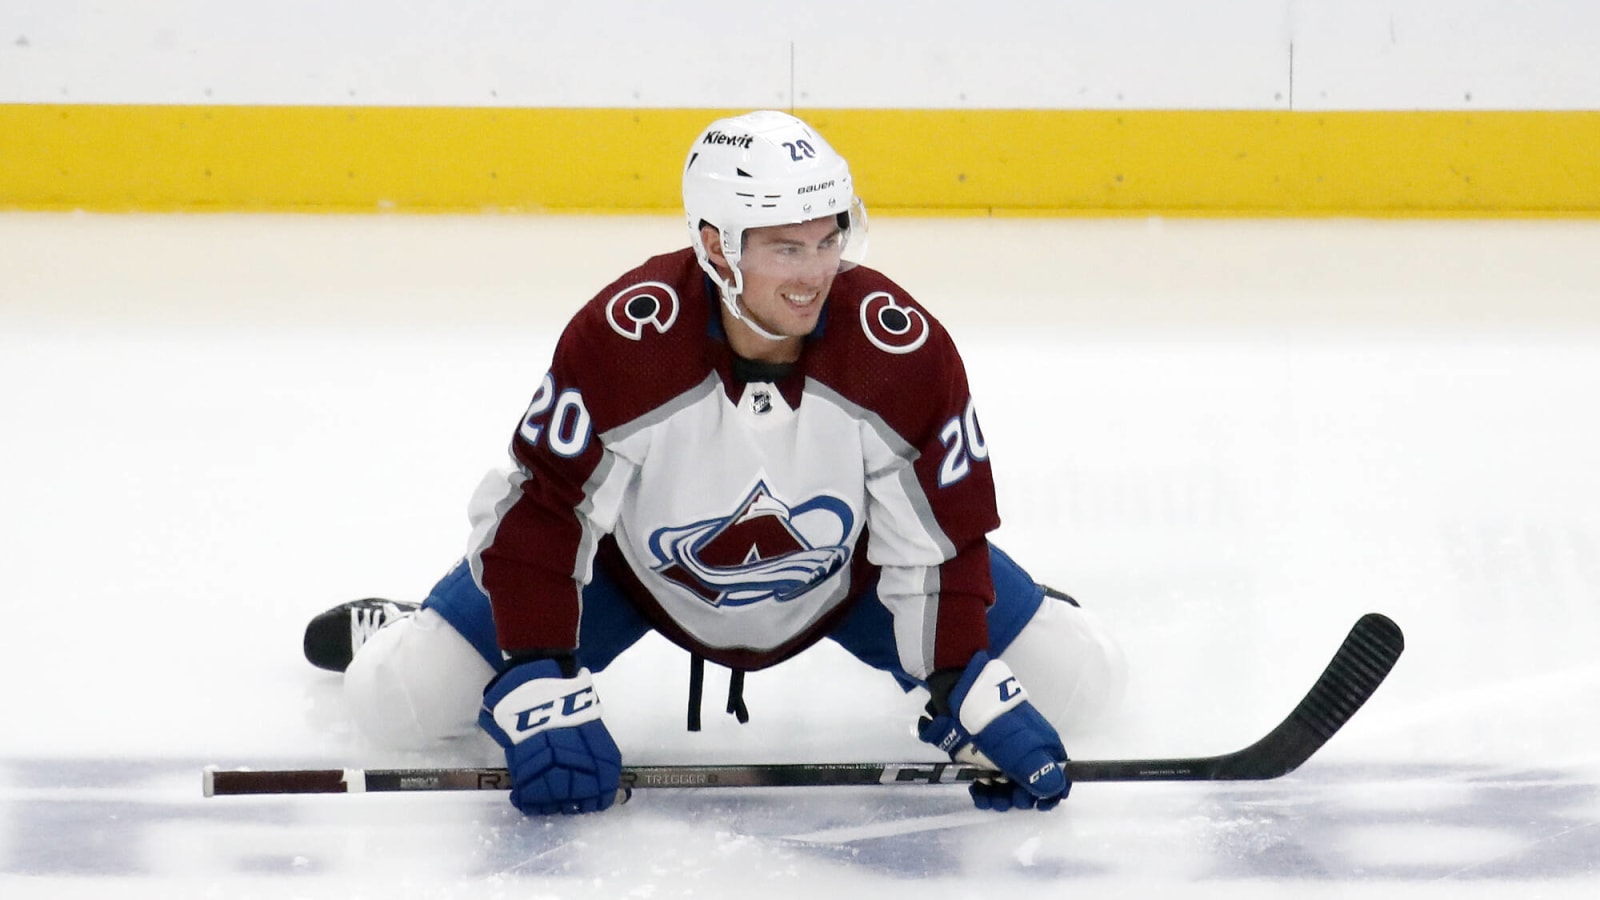 Colton fined $5,000 for actions in Avalanche game